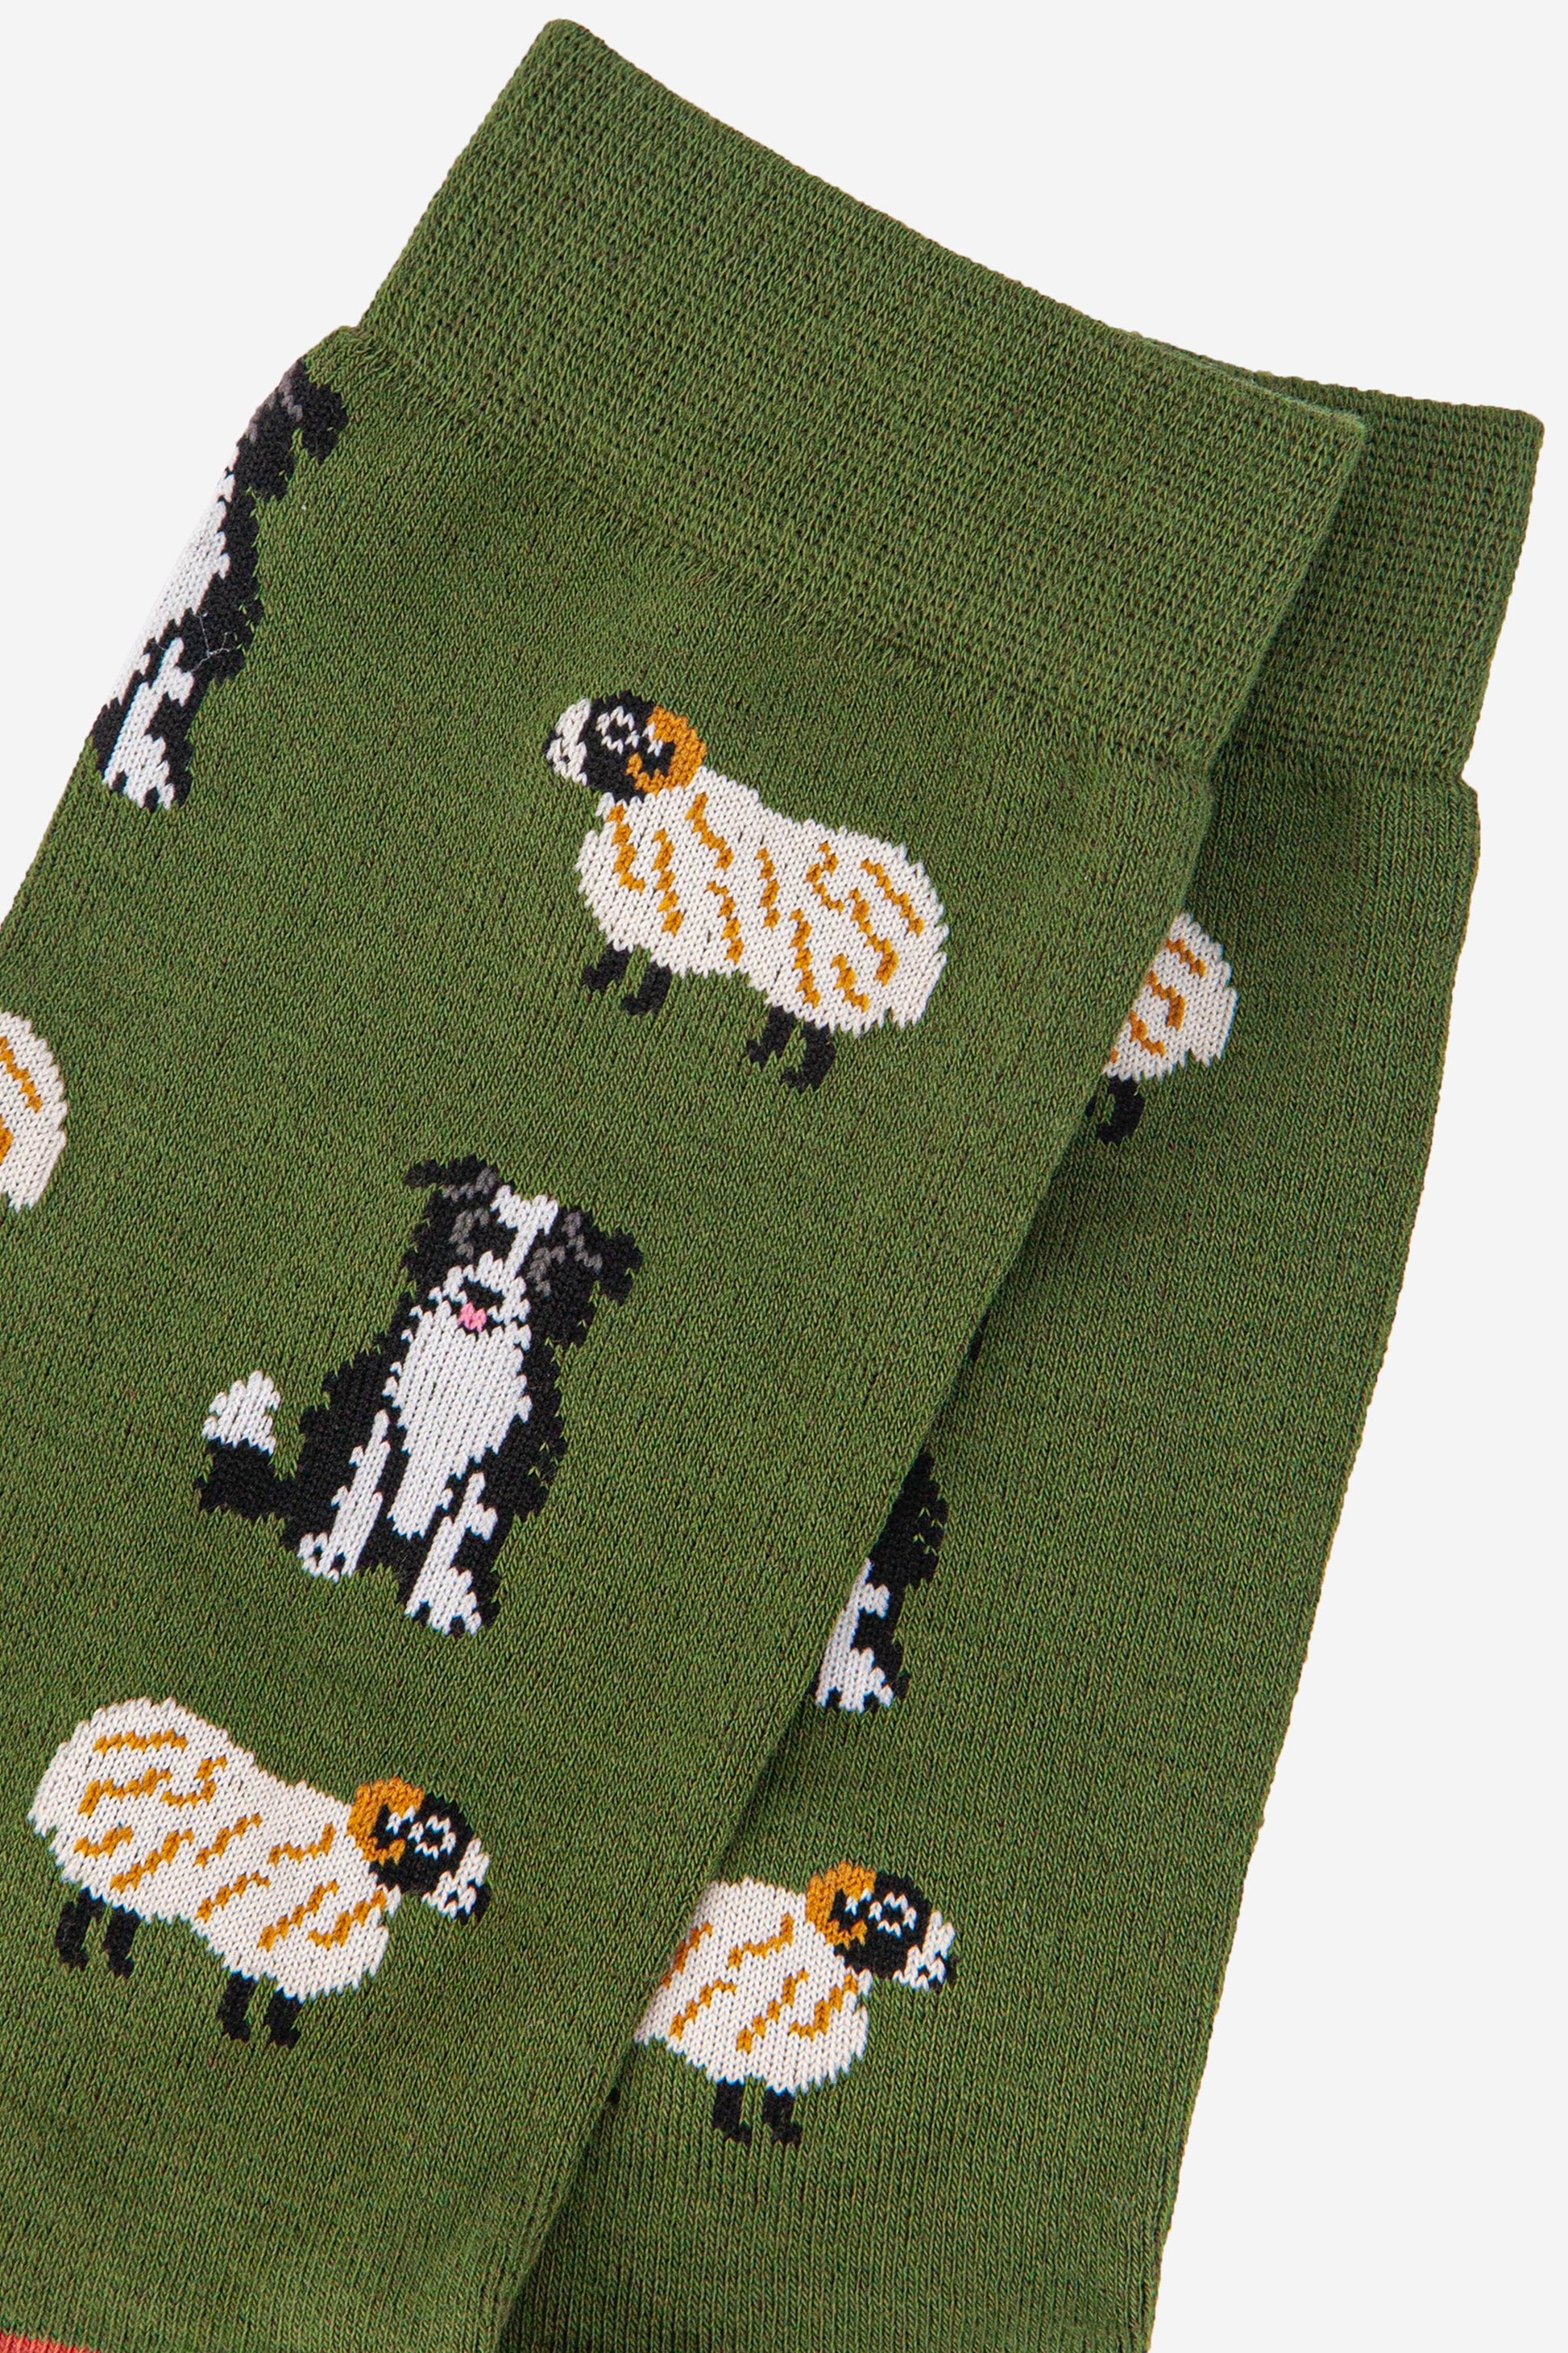 close up of the sheep and sheepdog design on the socks